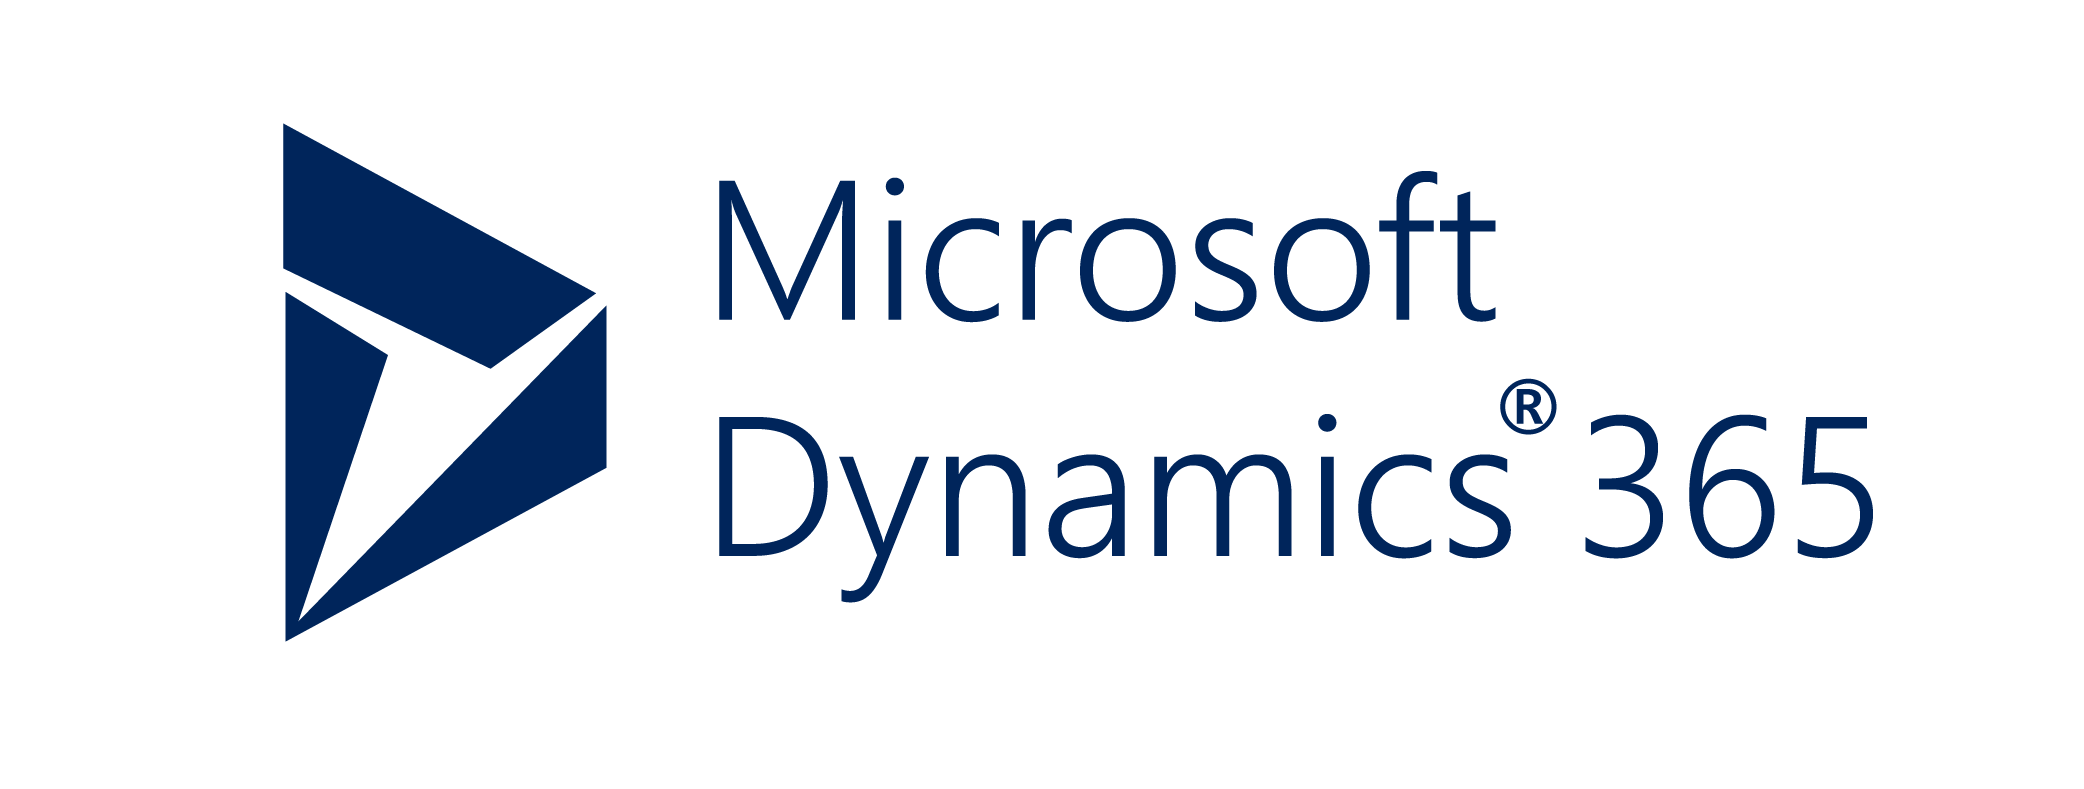 Ignite 2021: Microsoft Dynamics gets seamless integration with Teams - OnMSFT.com - March 2, 2021